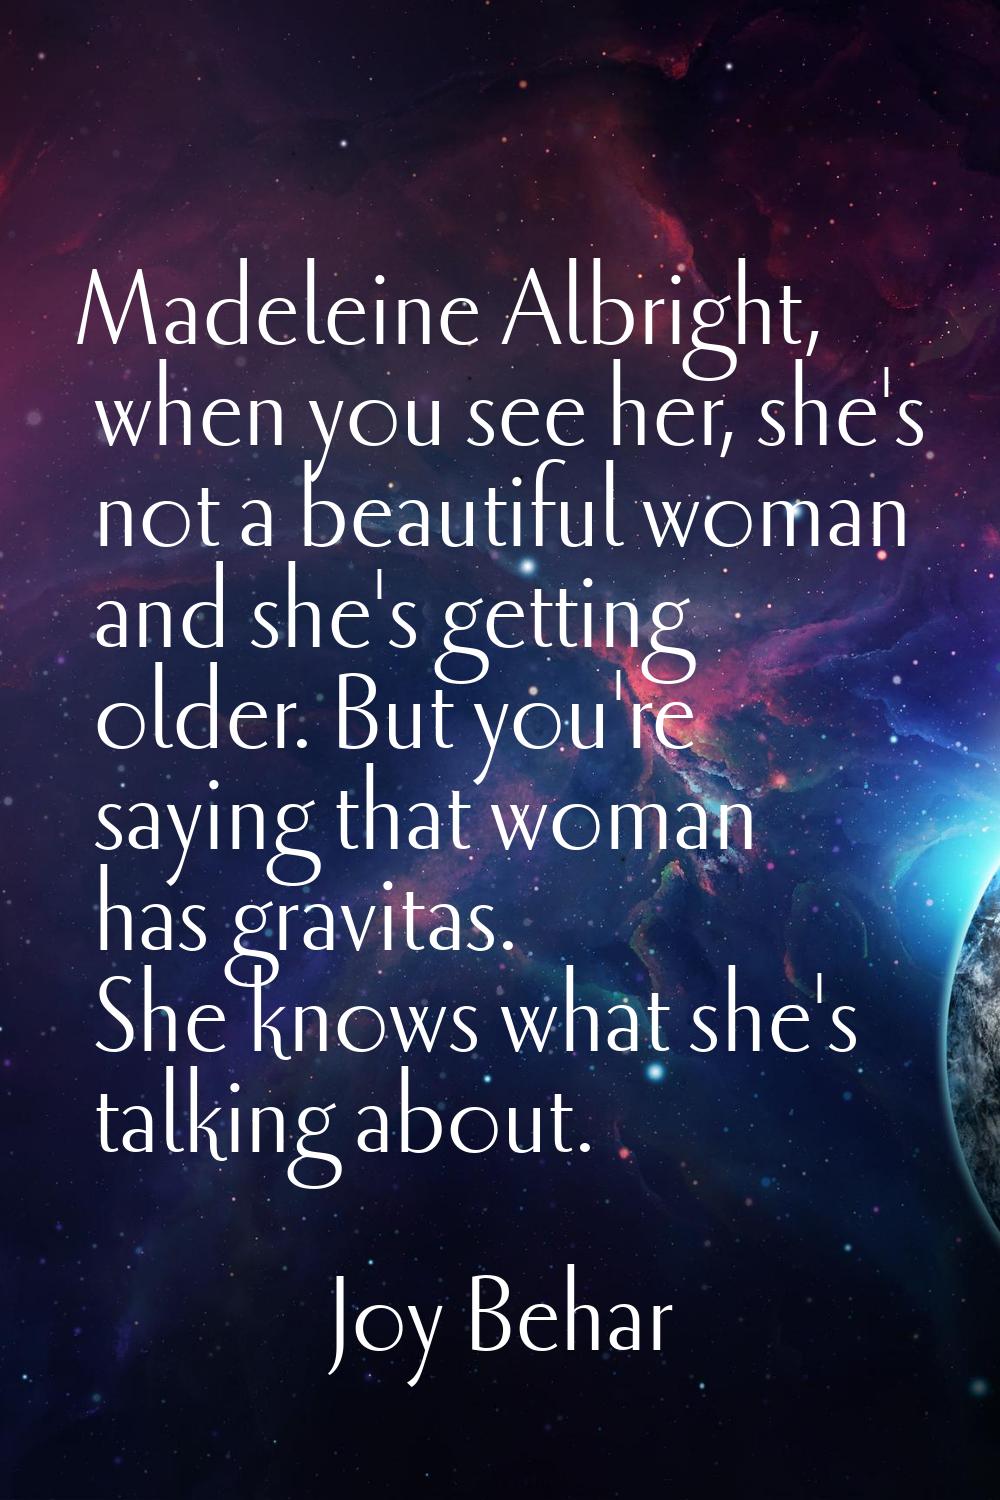 Madeleine Albright, when you see her, she's not a beautiful woman and she's getting older. But you'